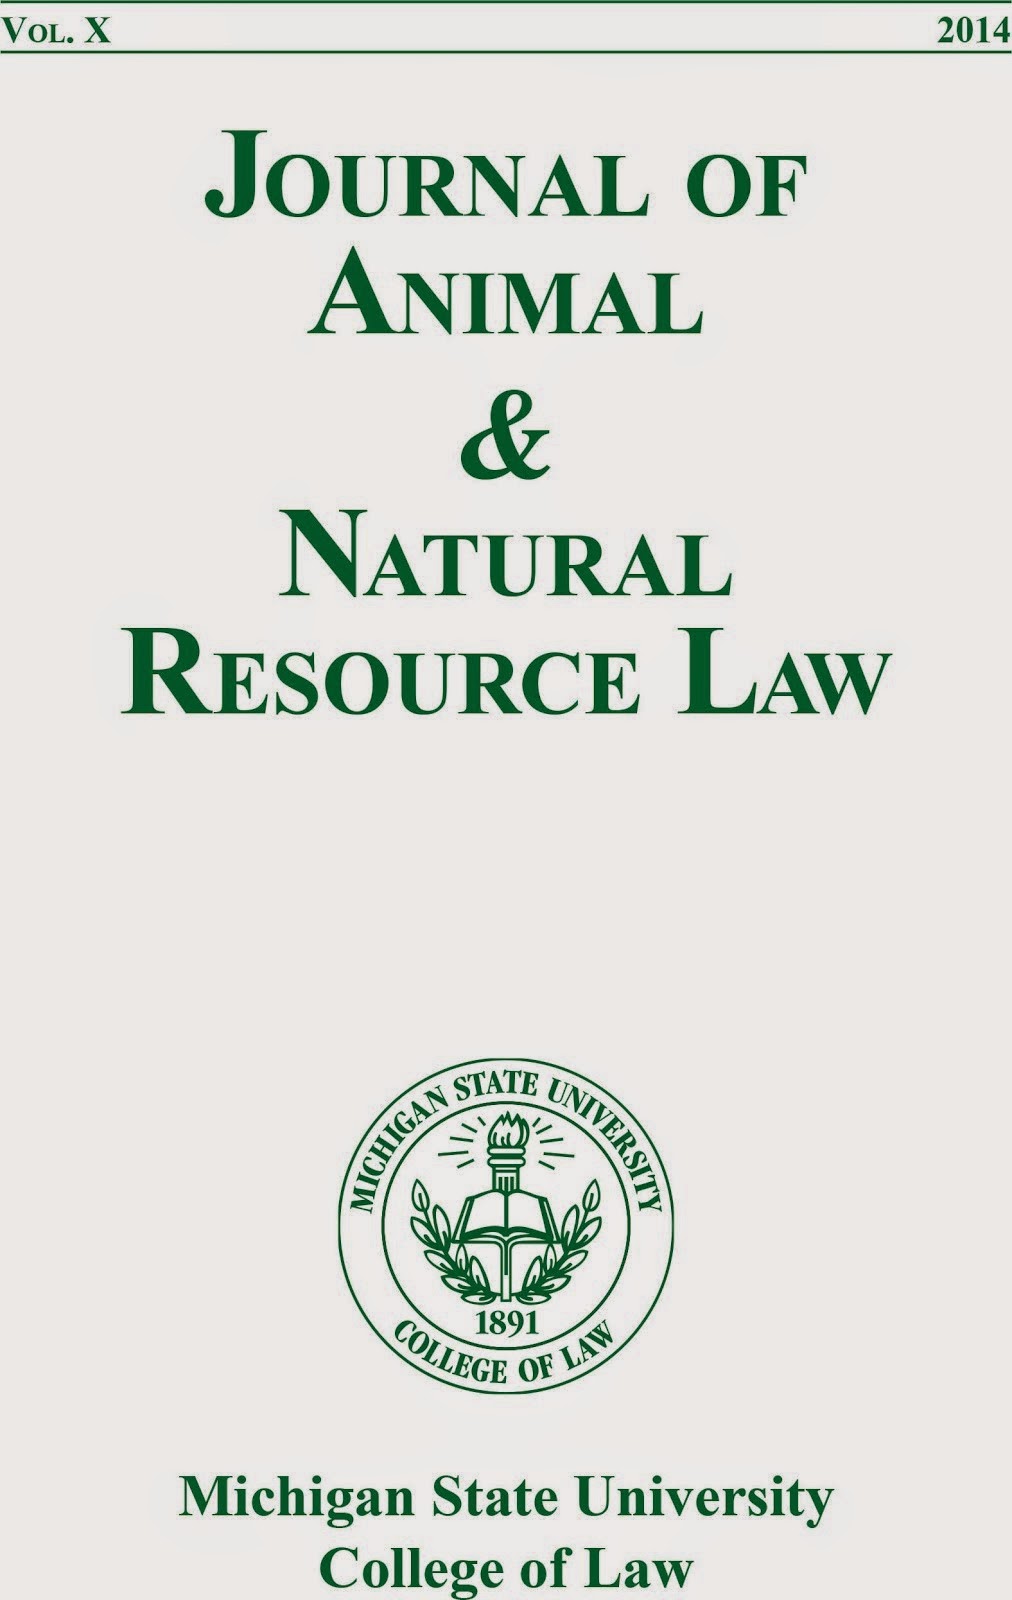 Journal of Animal and Natural Resource Law, vol. 10 (2014)